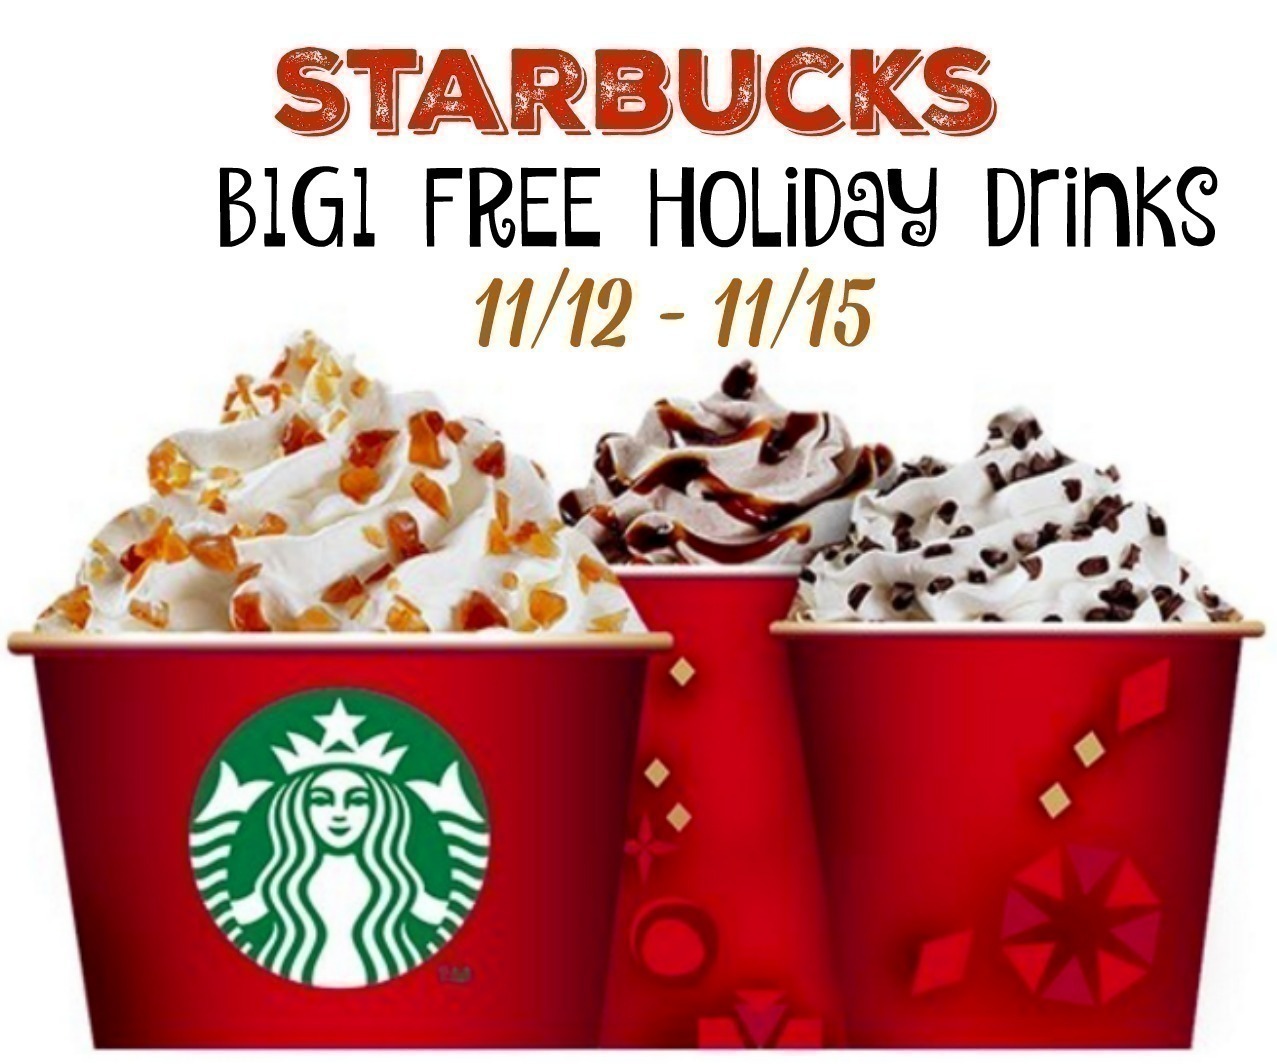 Starbucks: Buy 1 Get 1 FREE Holiday Drinks Ends Today!